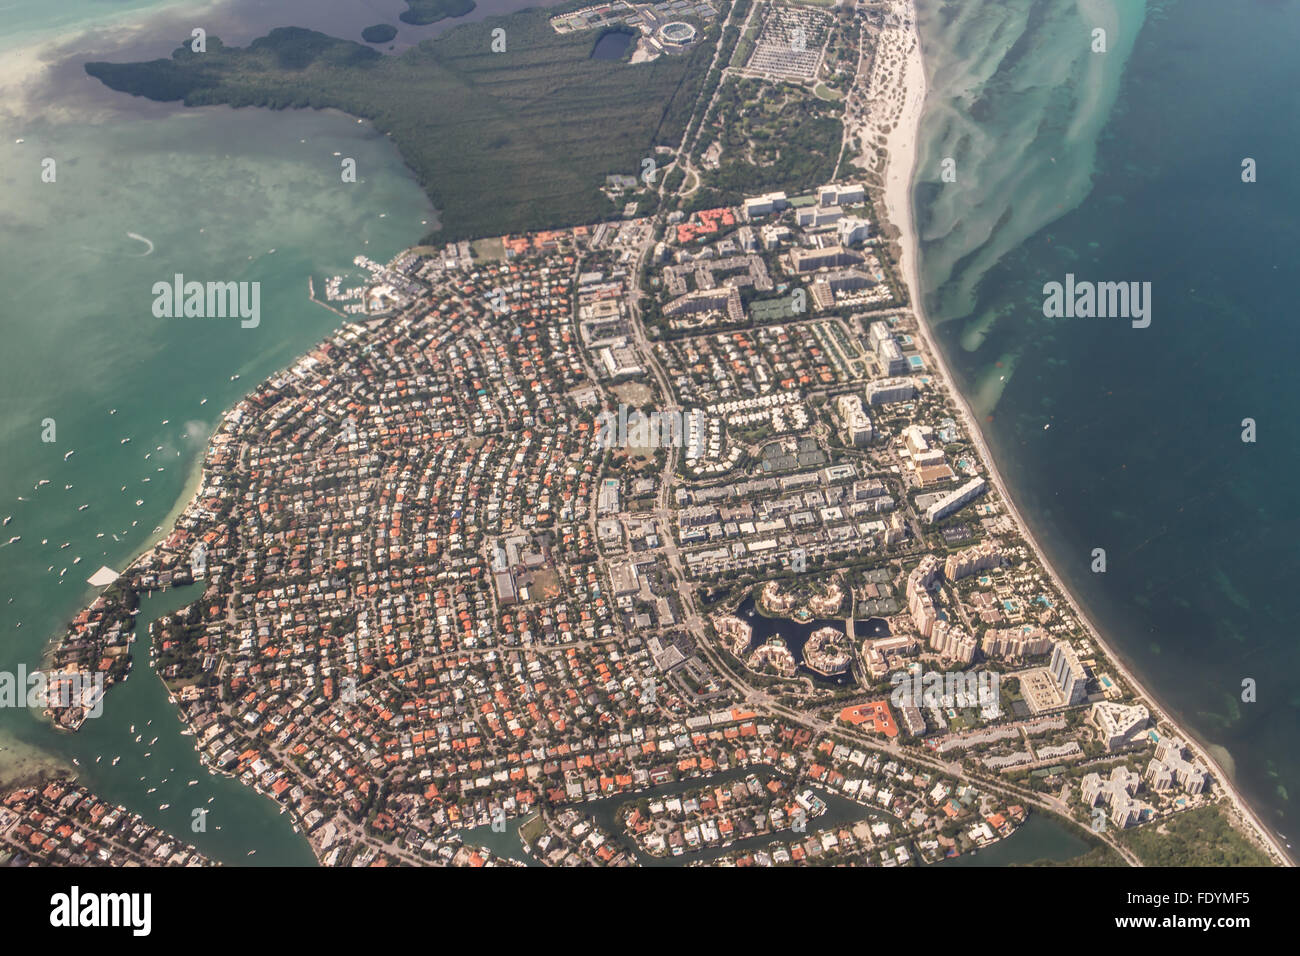 miami beach aerial view with residential zone Stock Photo